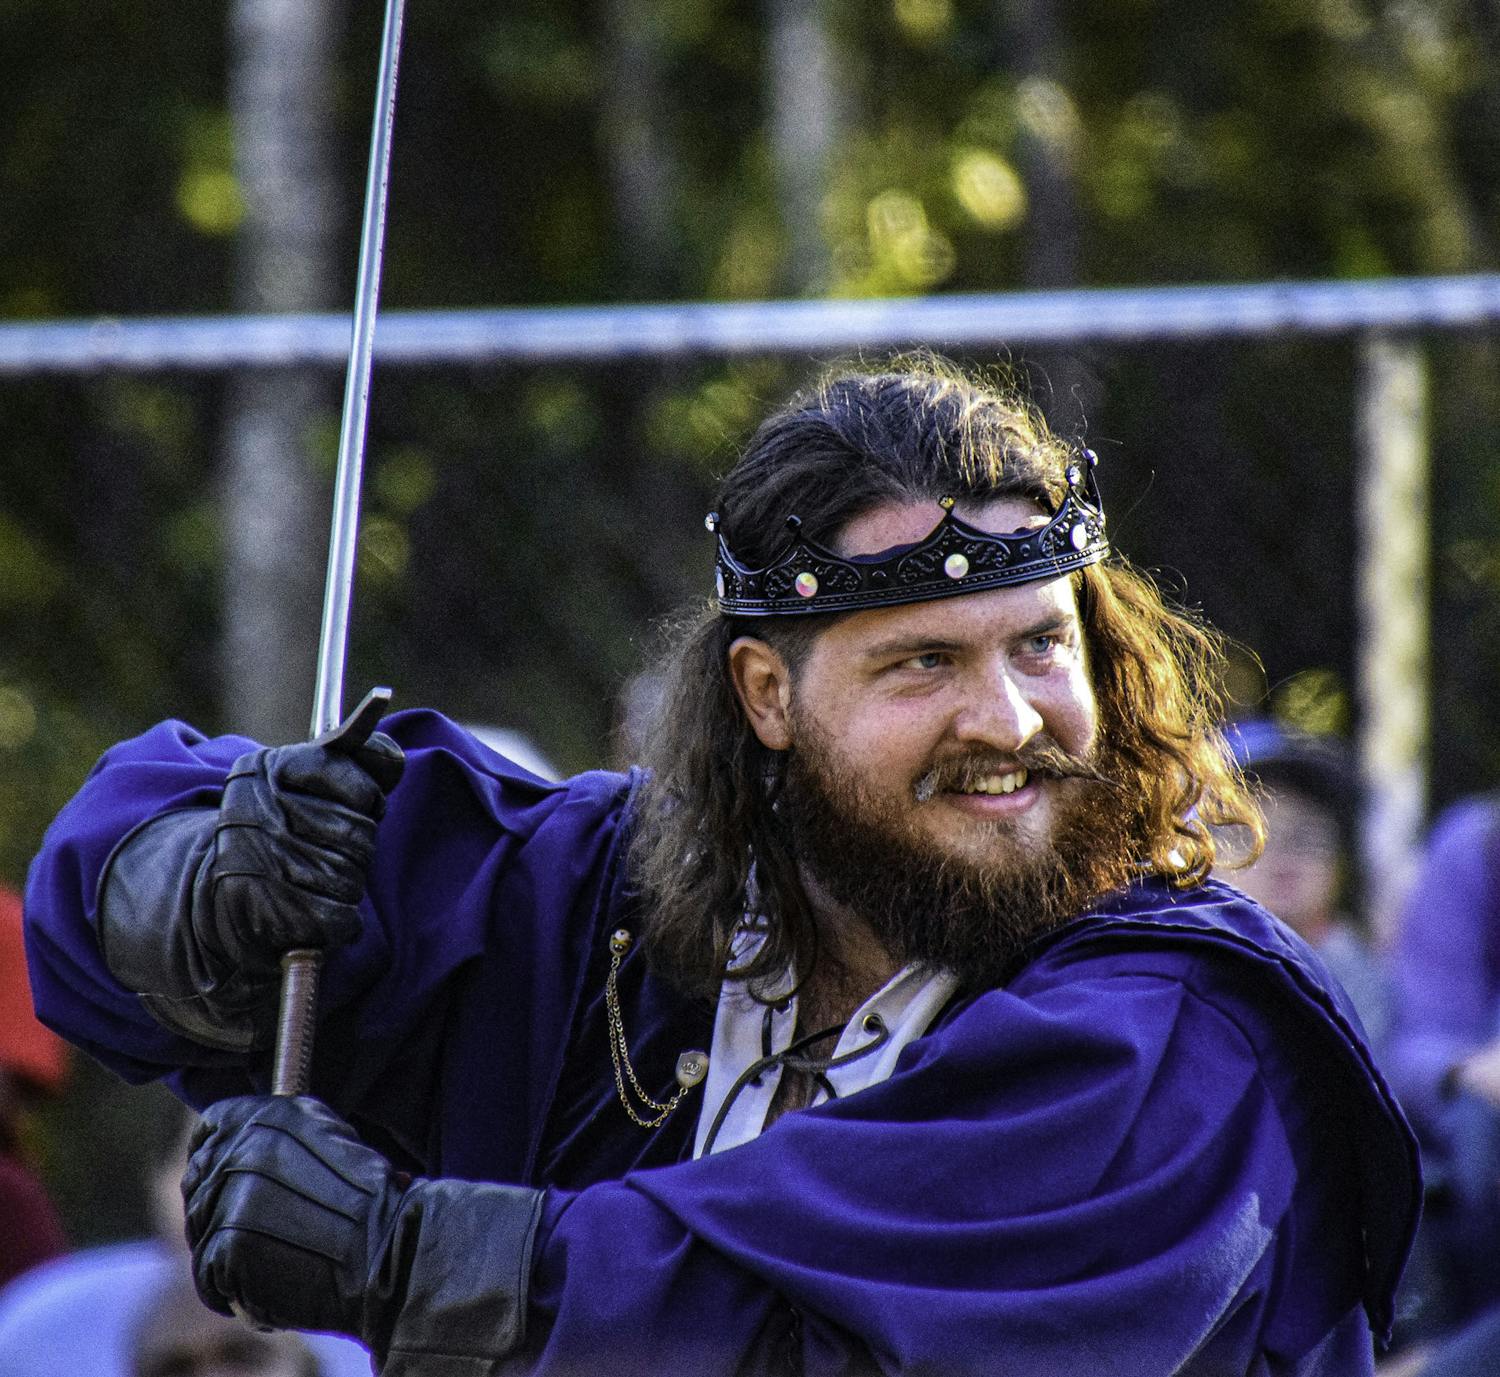 This year marks the Gainesville Hoggetowne Medieval Faire’s 34th anniversary. The multi-day event draws in tens of thousands of people, and was so popular that organizers added an extra weekend this year to help with overcrowding. Visitors can eat fried fair food, buy from over 160 merchants, watch people fight with swords and more. 